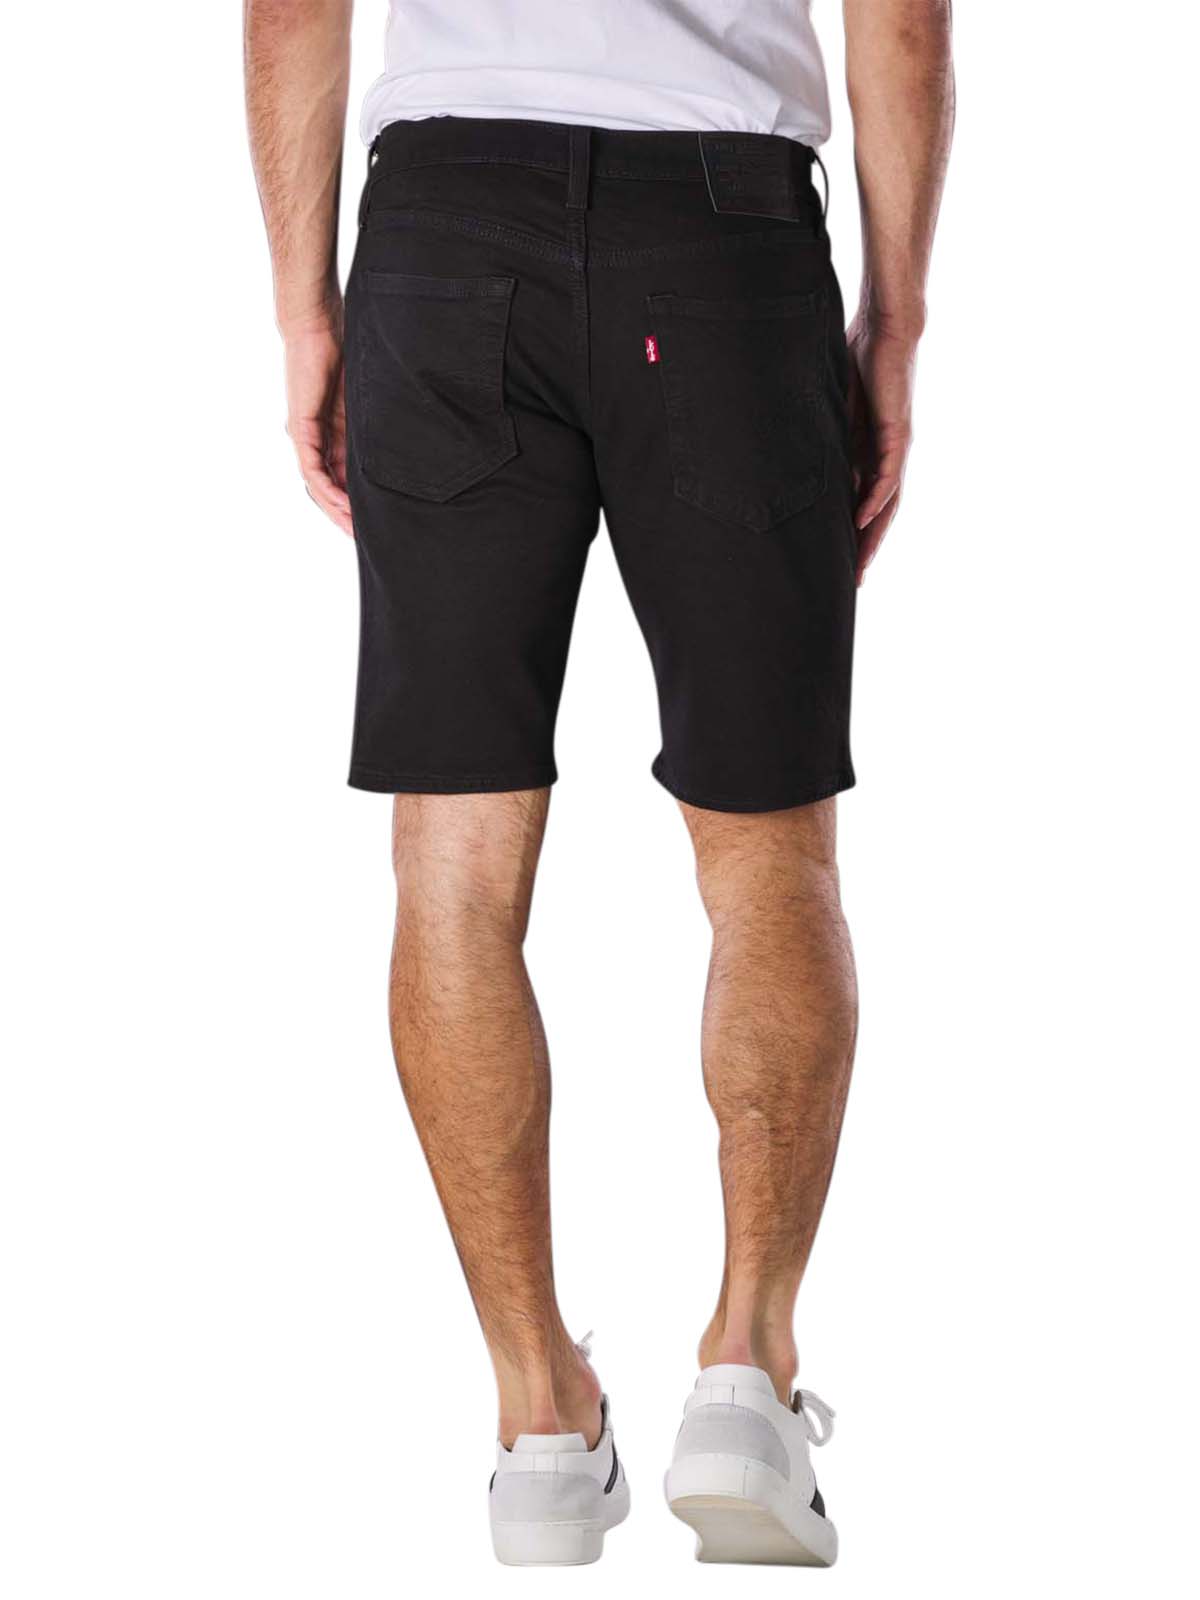 Levi's 405 Standard Short all black Levi's Men's Shorts | Free Shipping on   - SIMPLY LOOK GOOD